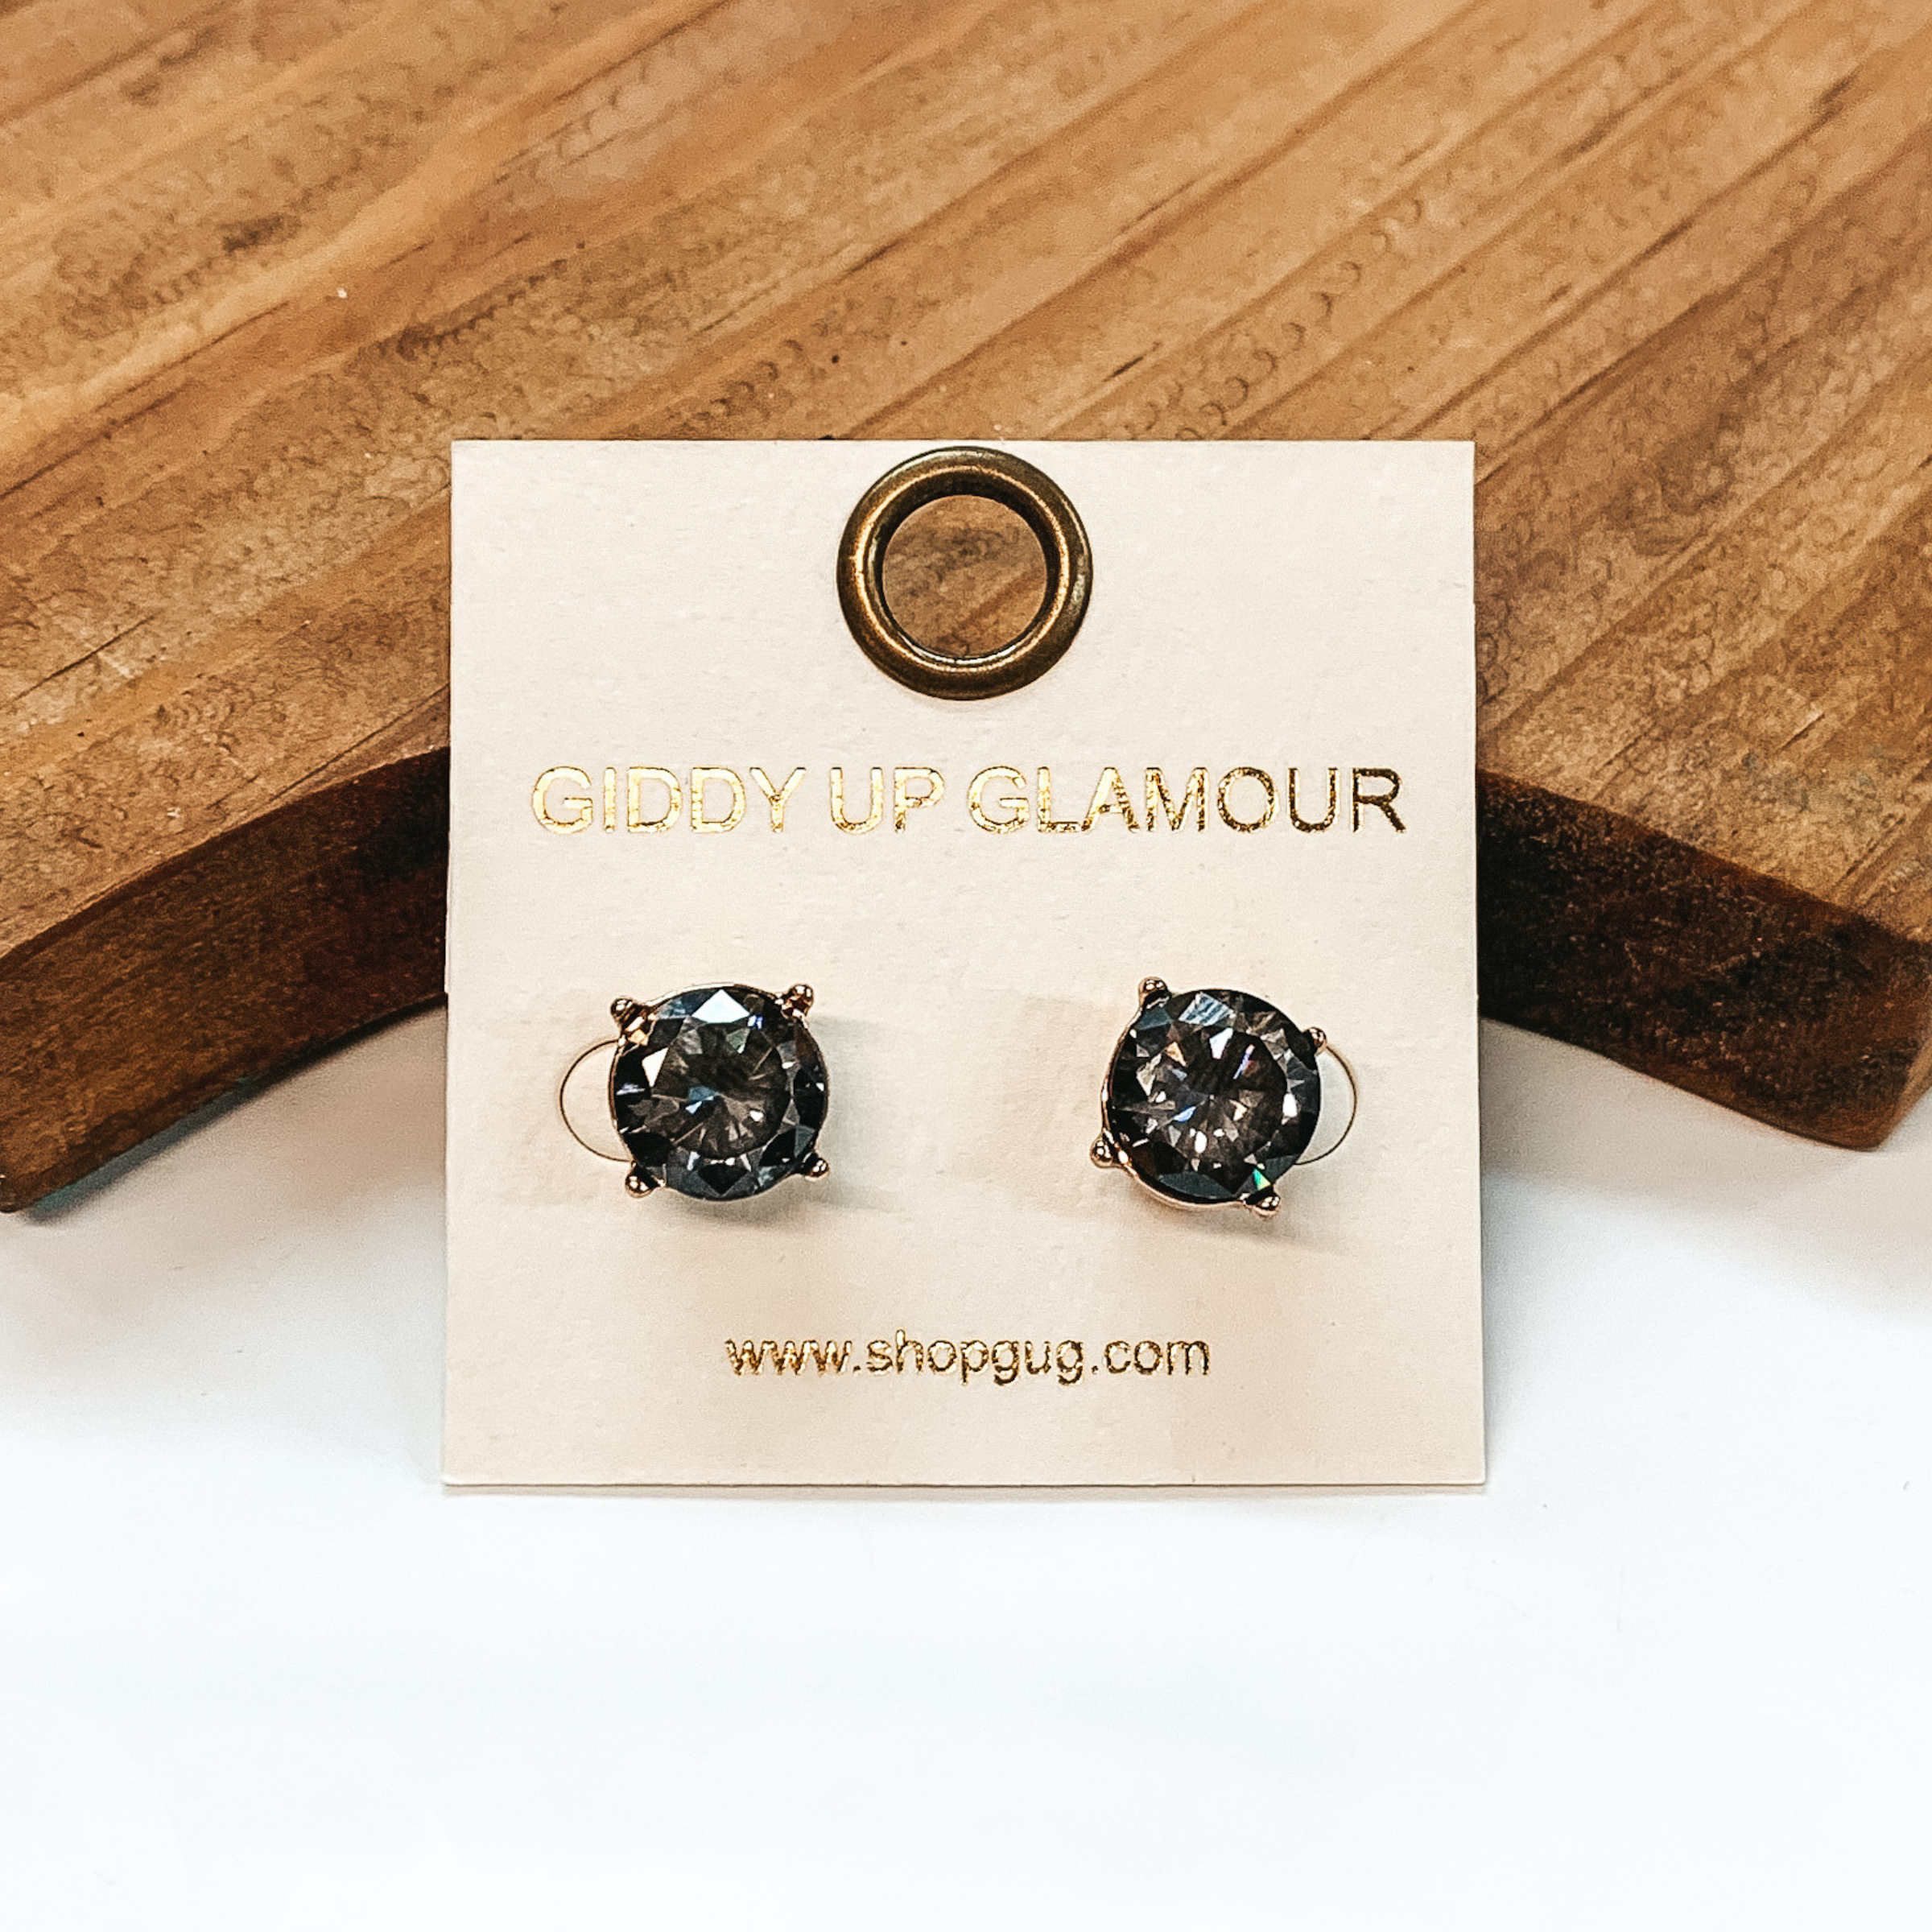 Gold setting stud earrings with CZ dark gray crystal. These earrings are pictured on a white background with a brown block in the back.